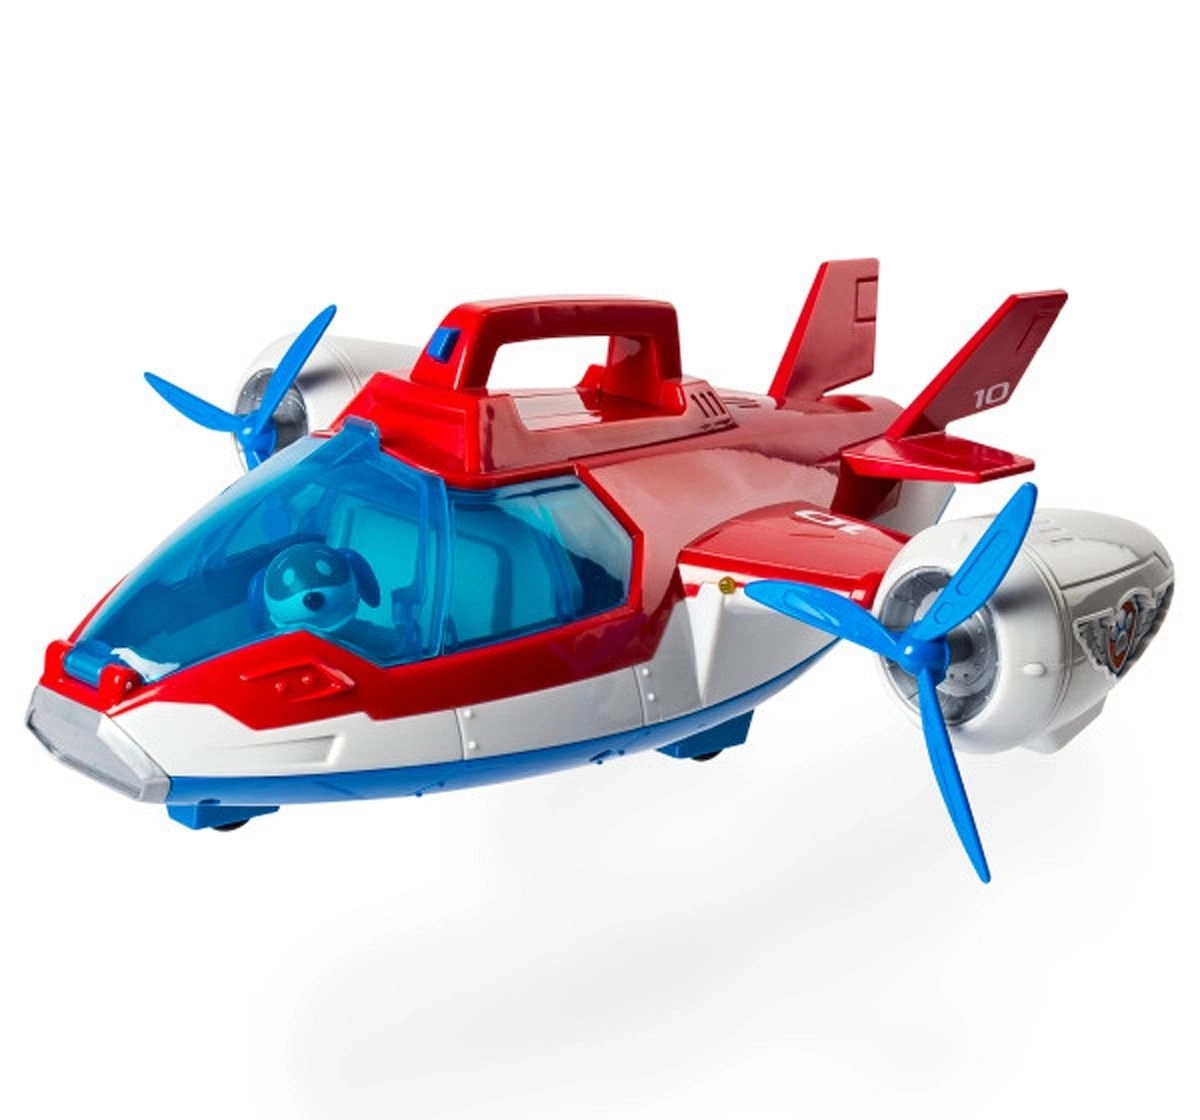 Paw Patrol Air Patroller Ryder Roleplay Set for Kids 3Y+, Multicolour